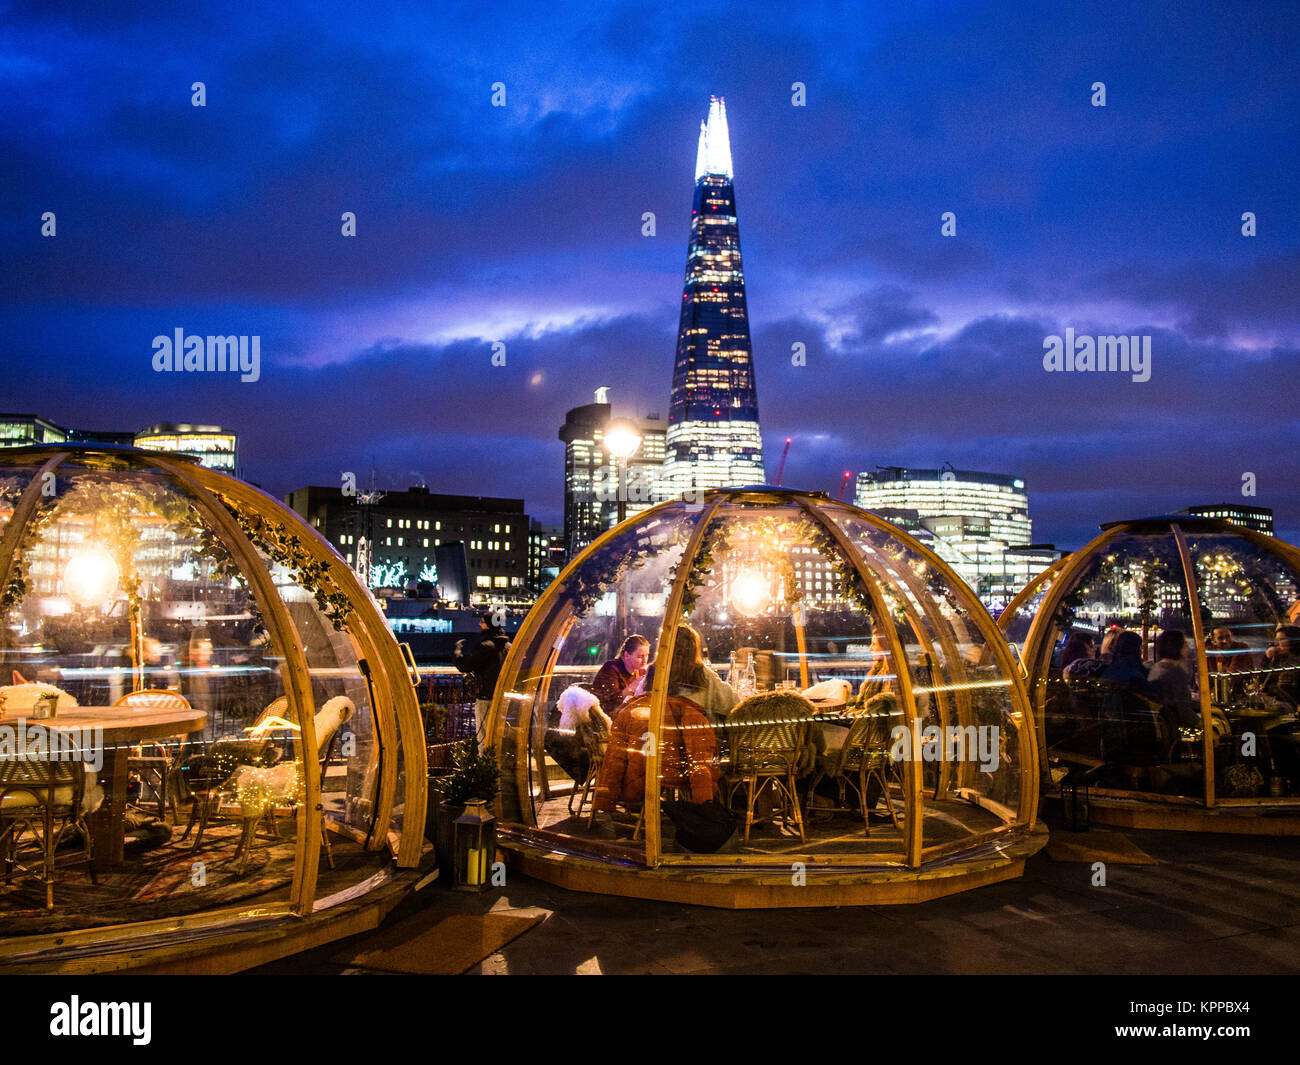 'Igloo's' at the Coppa Club restaurant with the 'Shard' skyscraper in the background, London, England Stock Photo